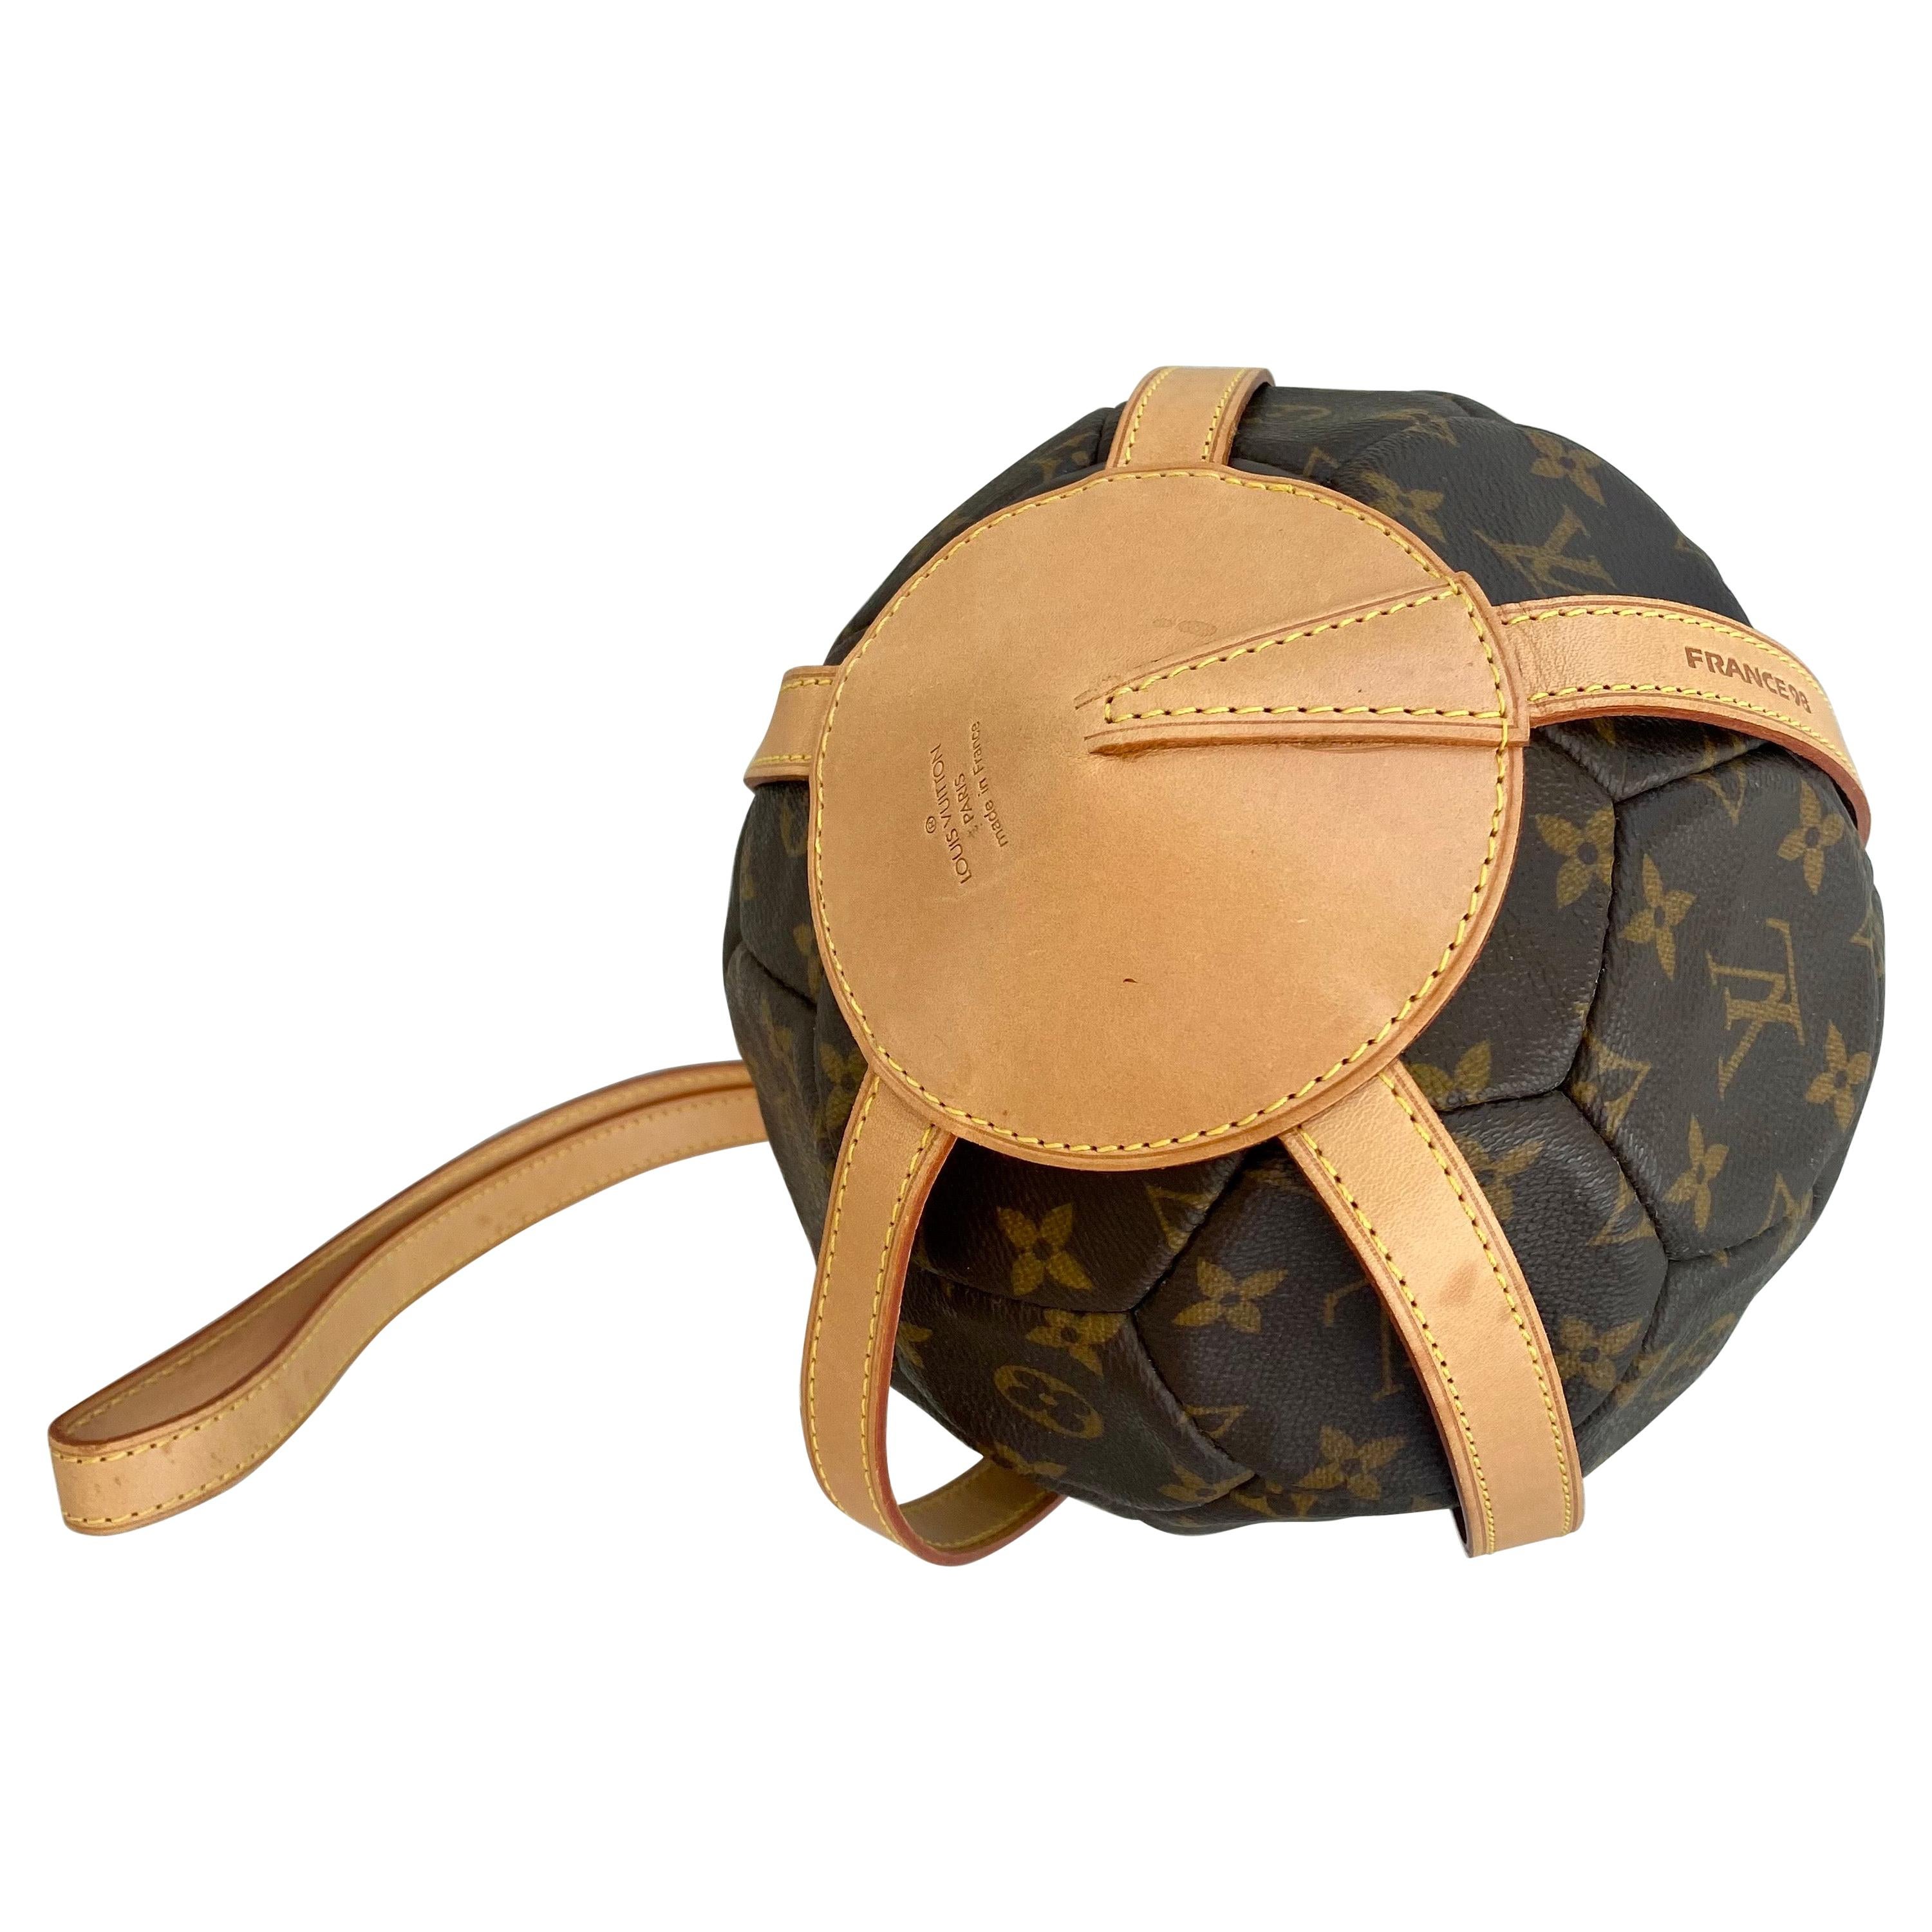 Louis+Vuitton+Soccer+Ball+Top+Handle+Bag+Brown+Leather for sale online